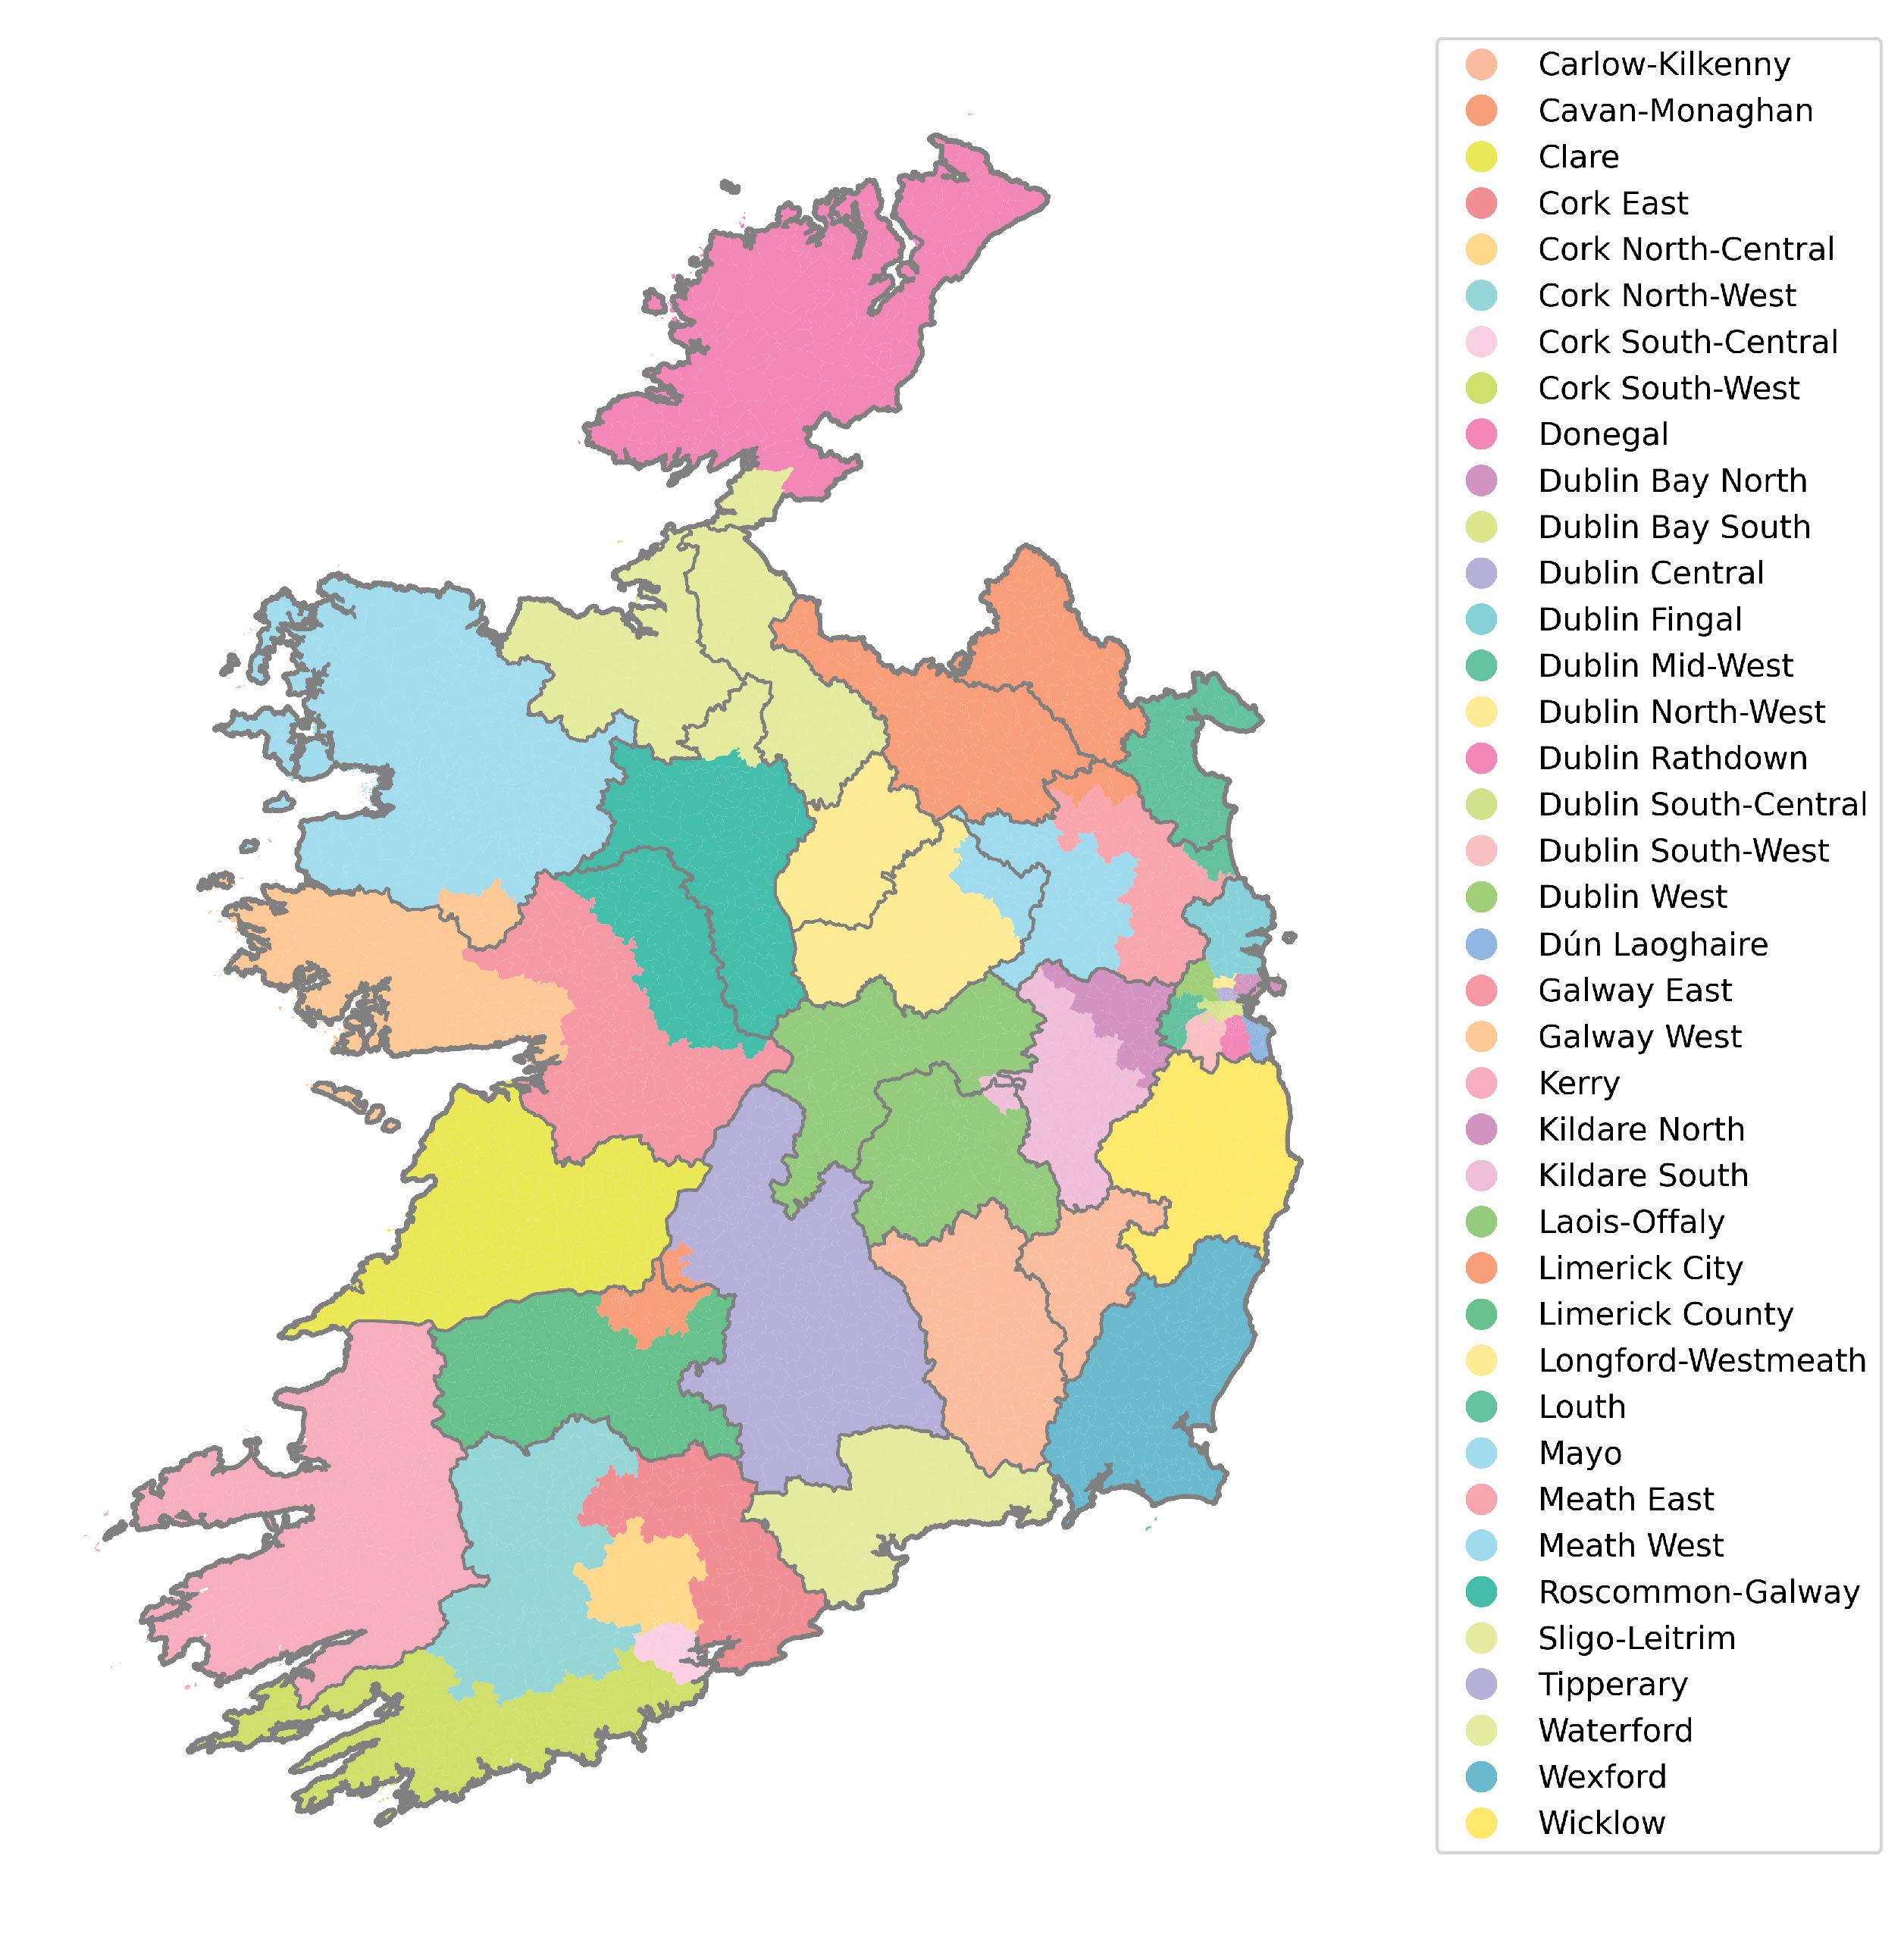 Map of Ireland coloured by constituency, overlaid with county boundaries